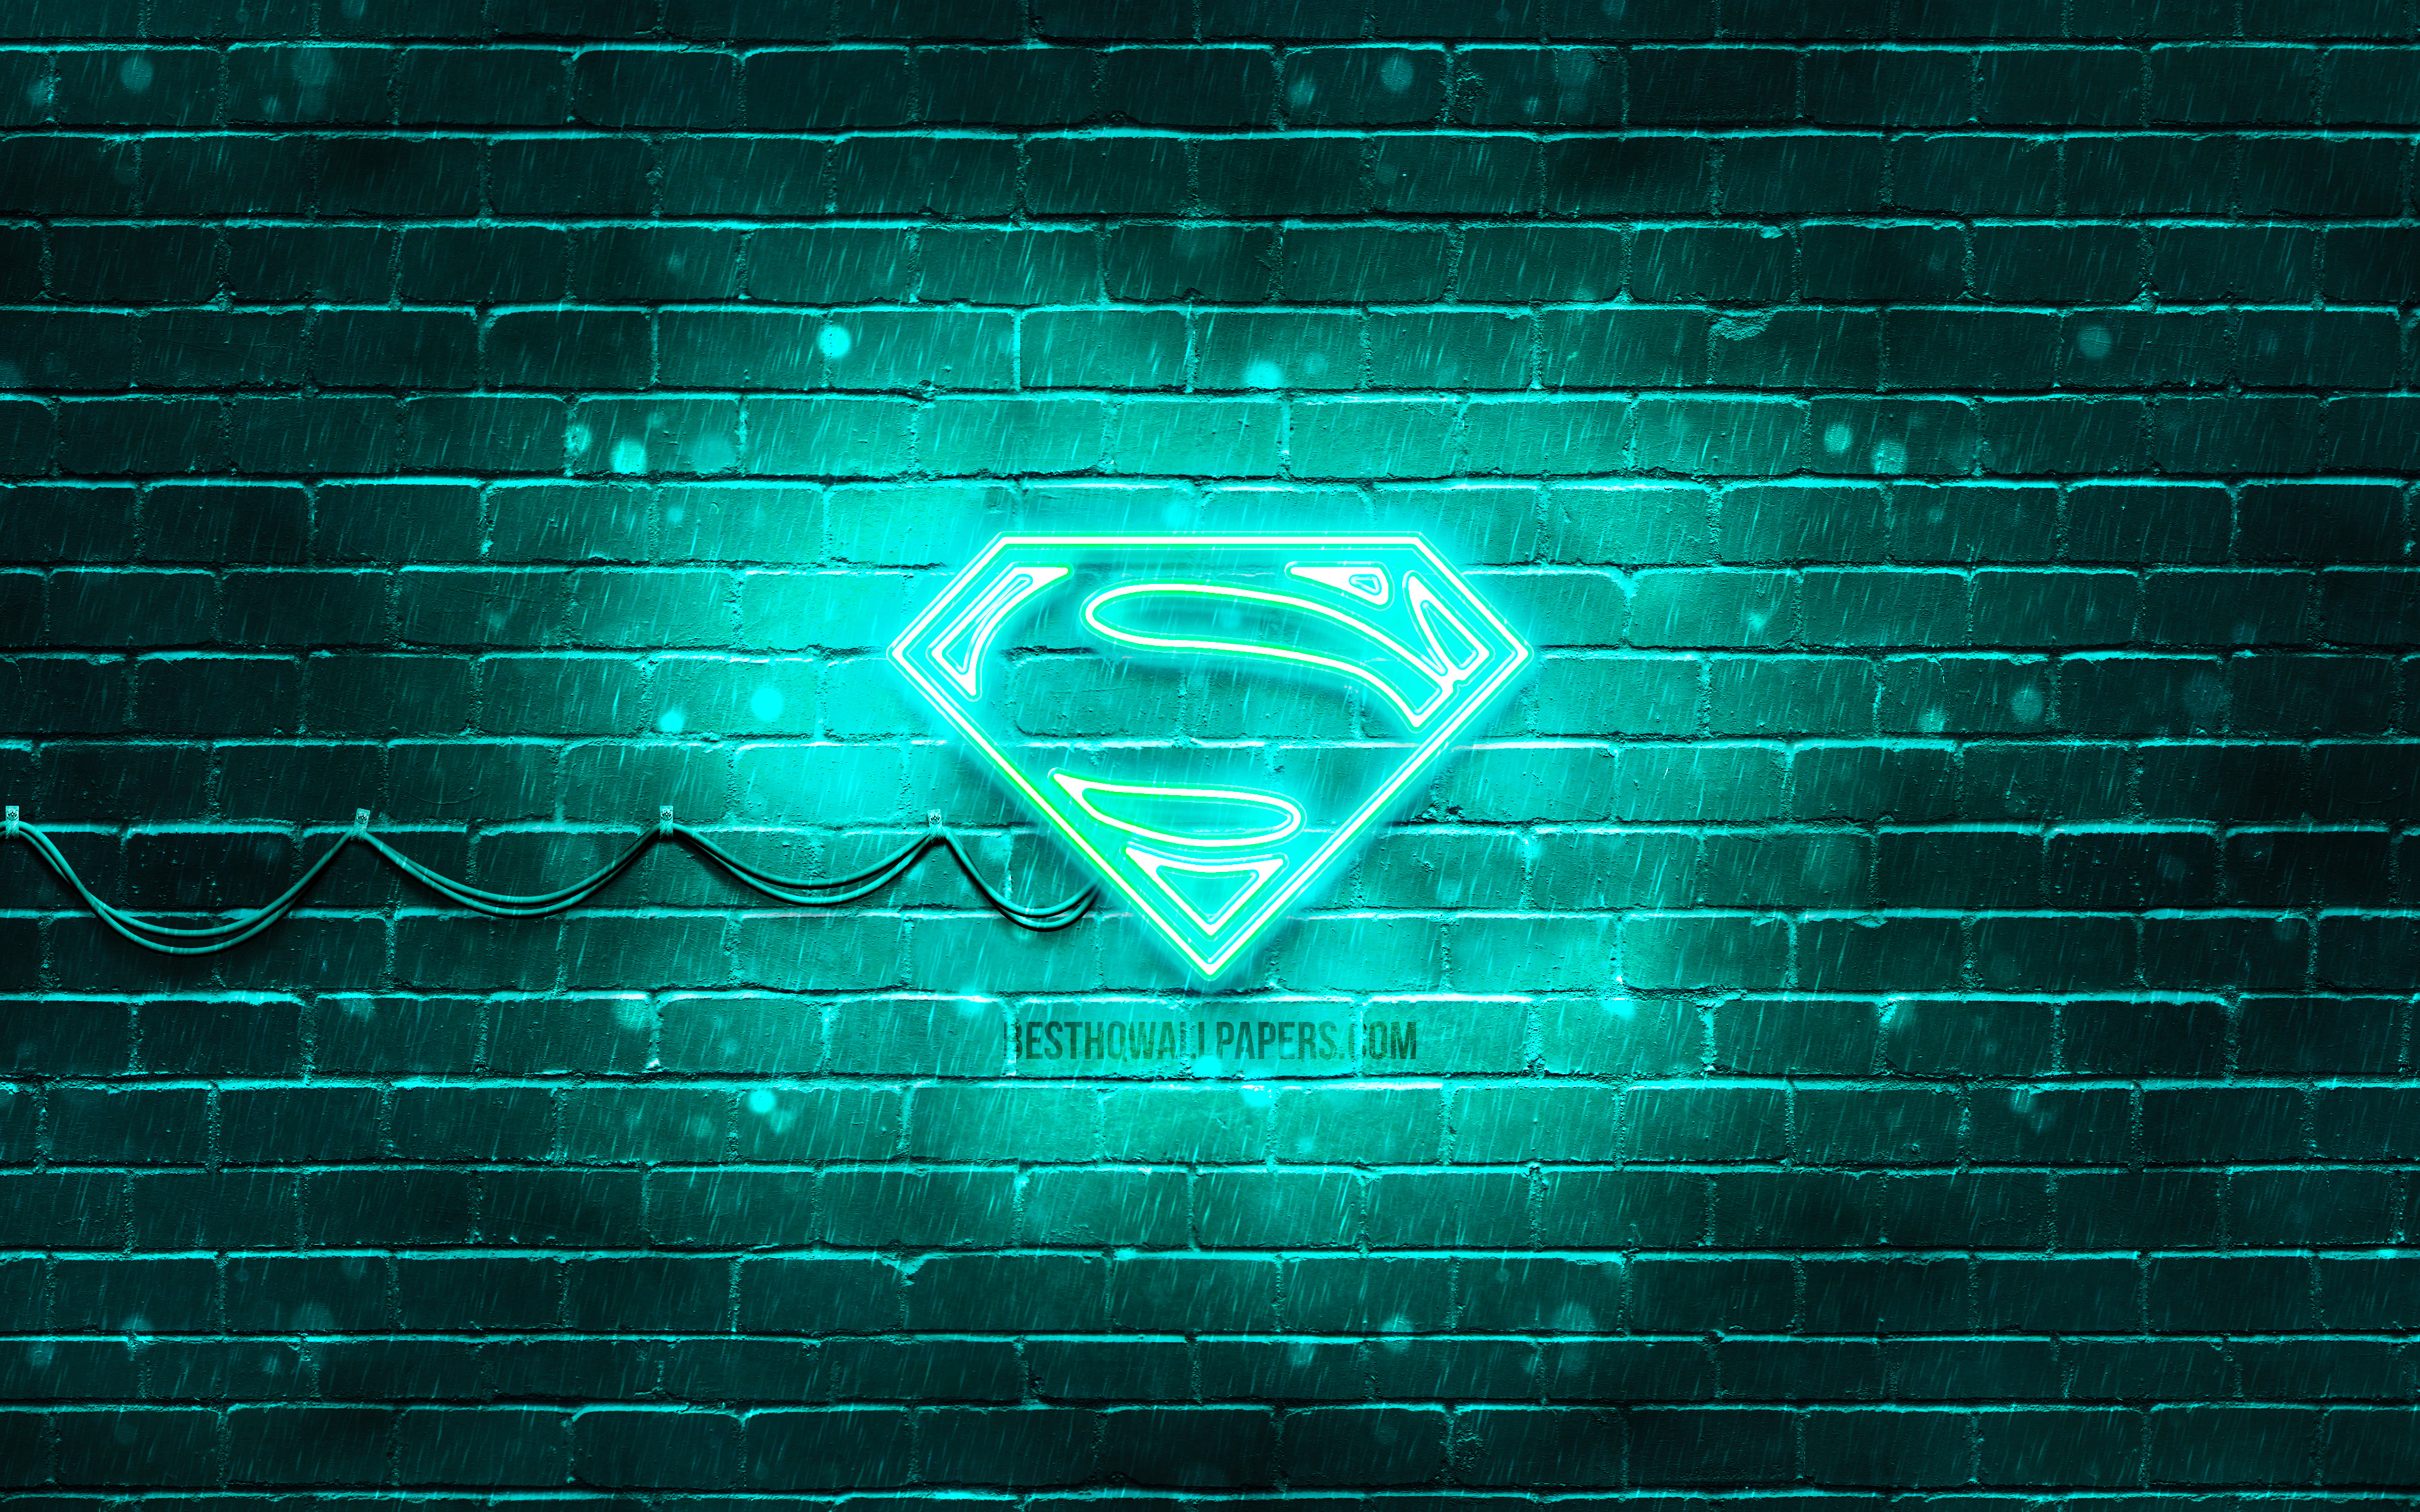 Download wallpaper Superman turquoise logo, 4k, turquoise brickwall, Superman logo, superheroes, Superman neon logo, Superman for desktop with resolution 3840x2400. High Quality HD picture wallpaper